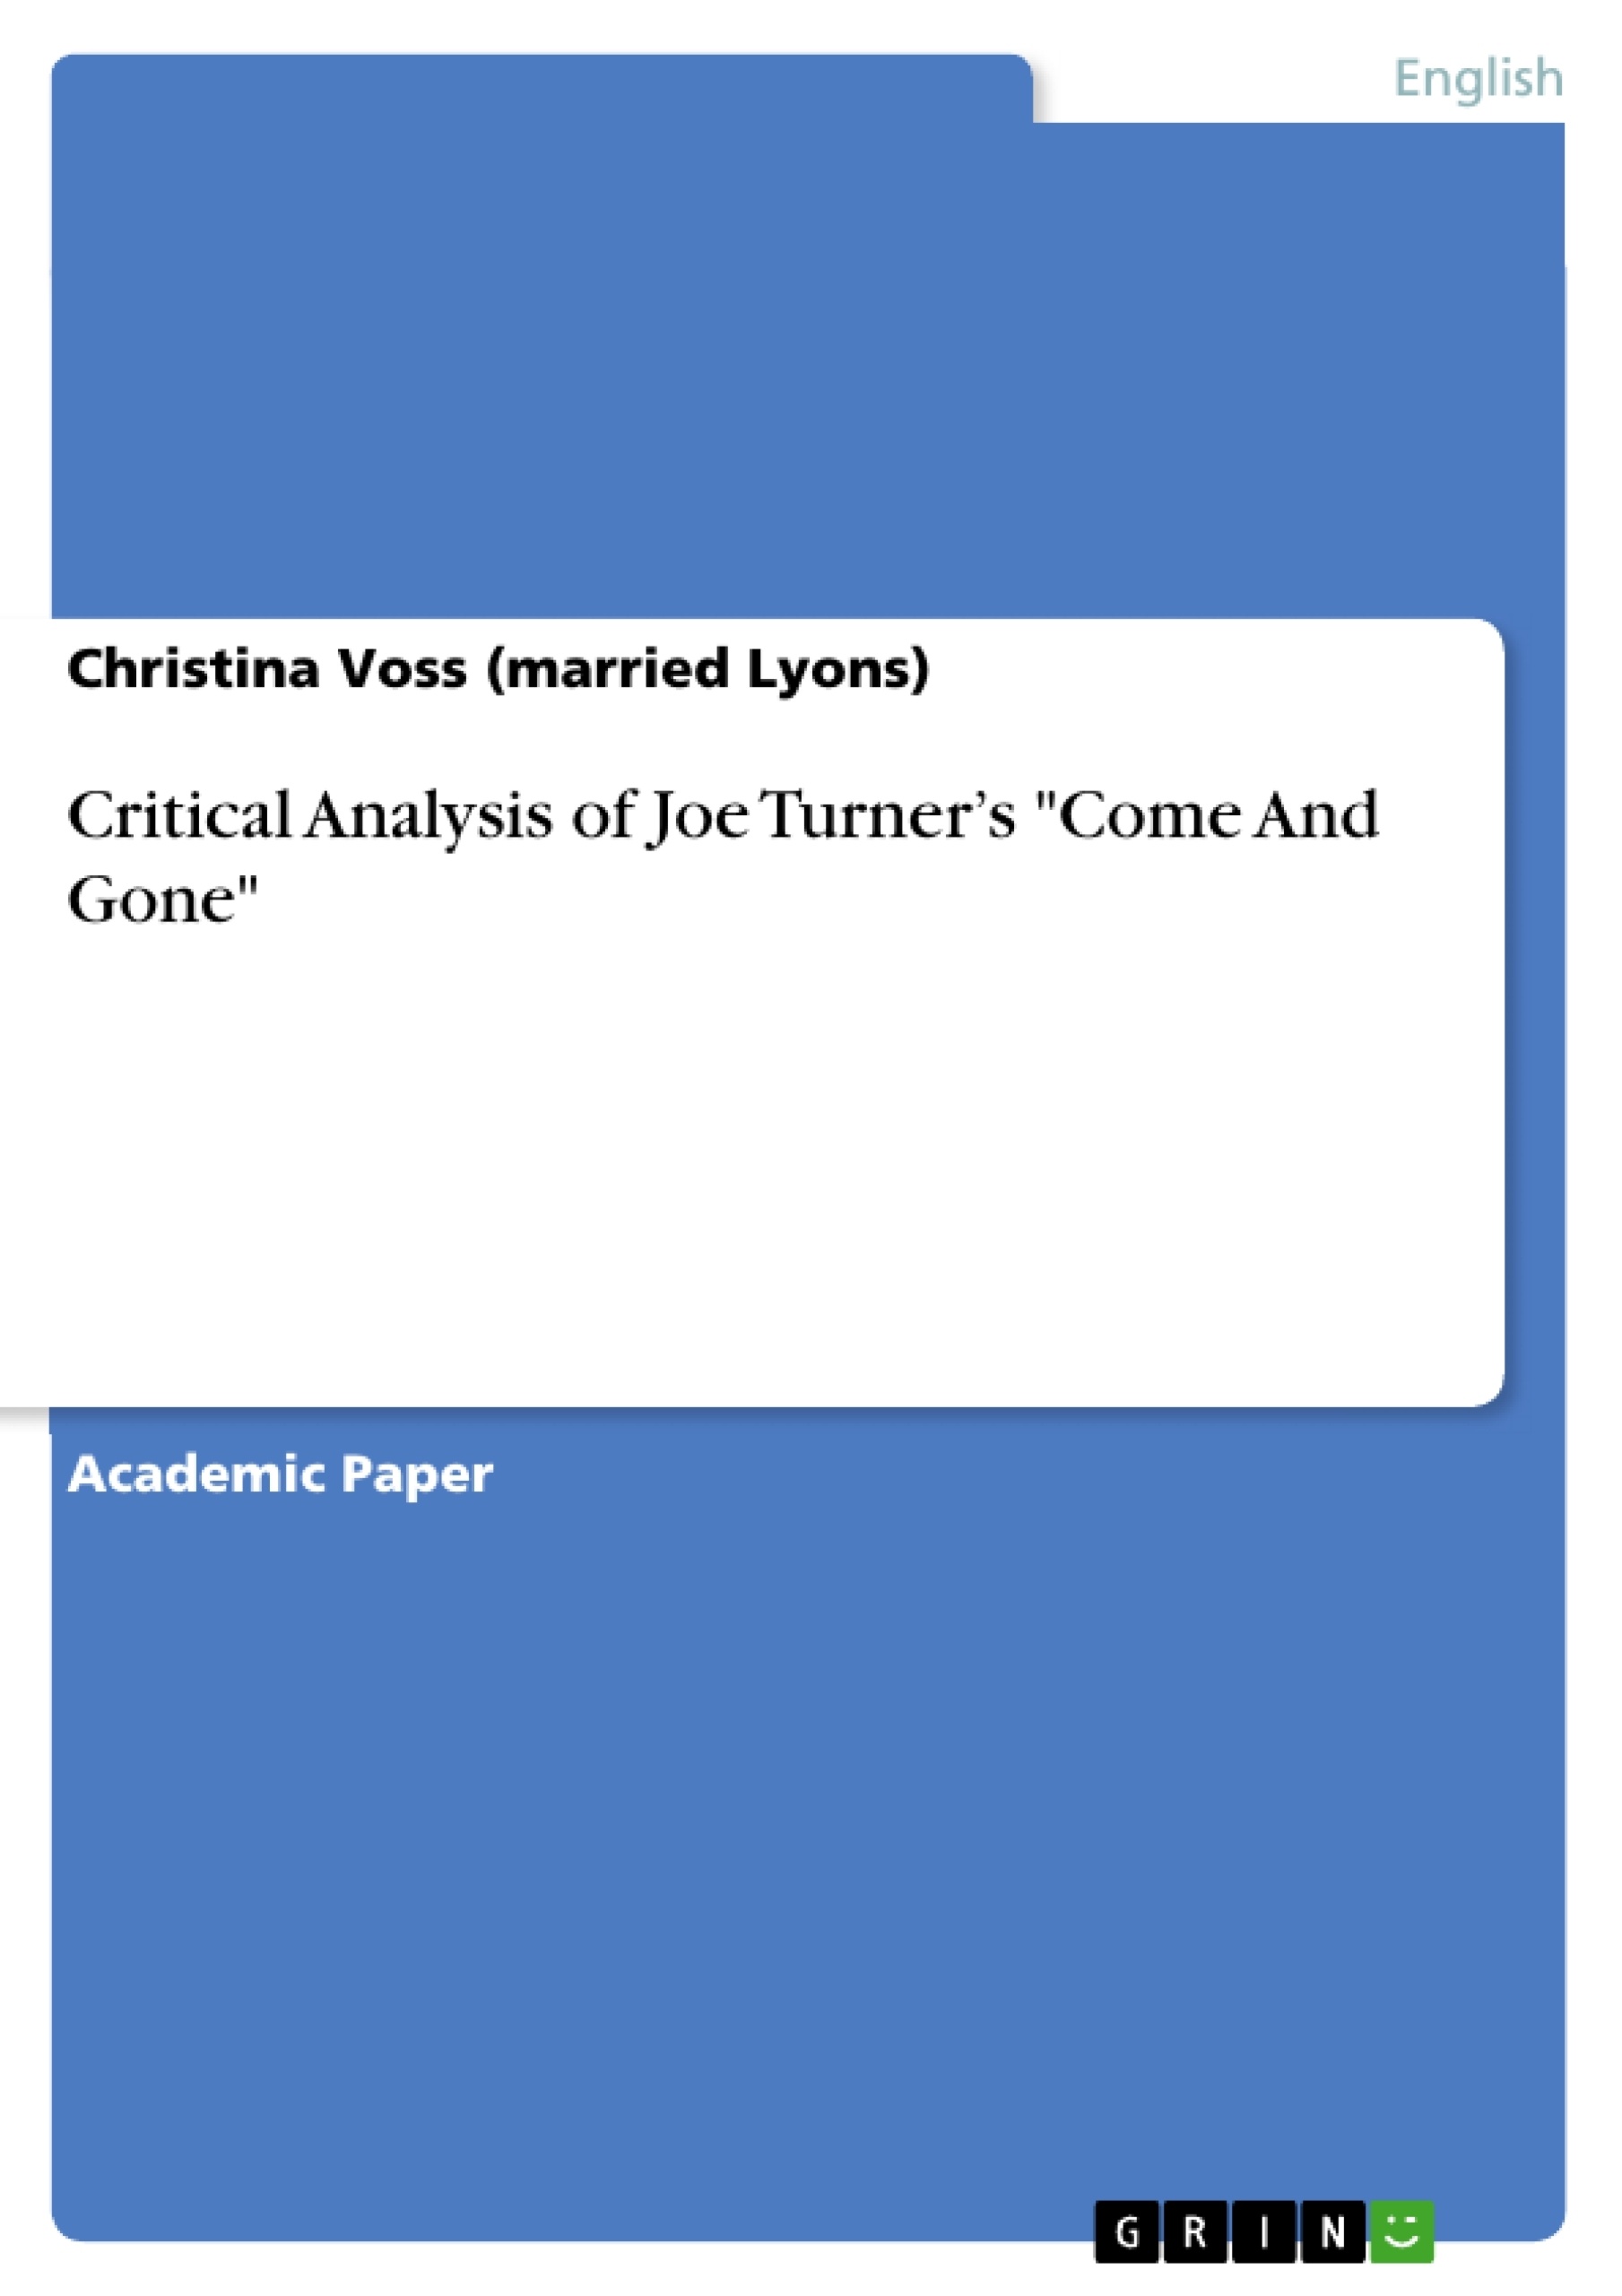 Title: Critical Analysis of Joe Turner’s "Come And Gone"